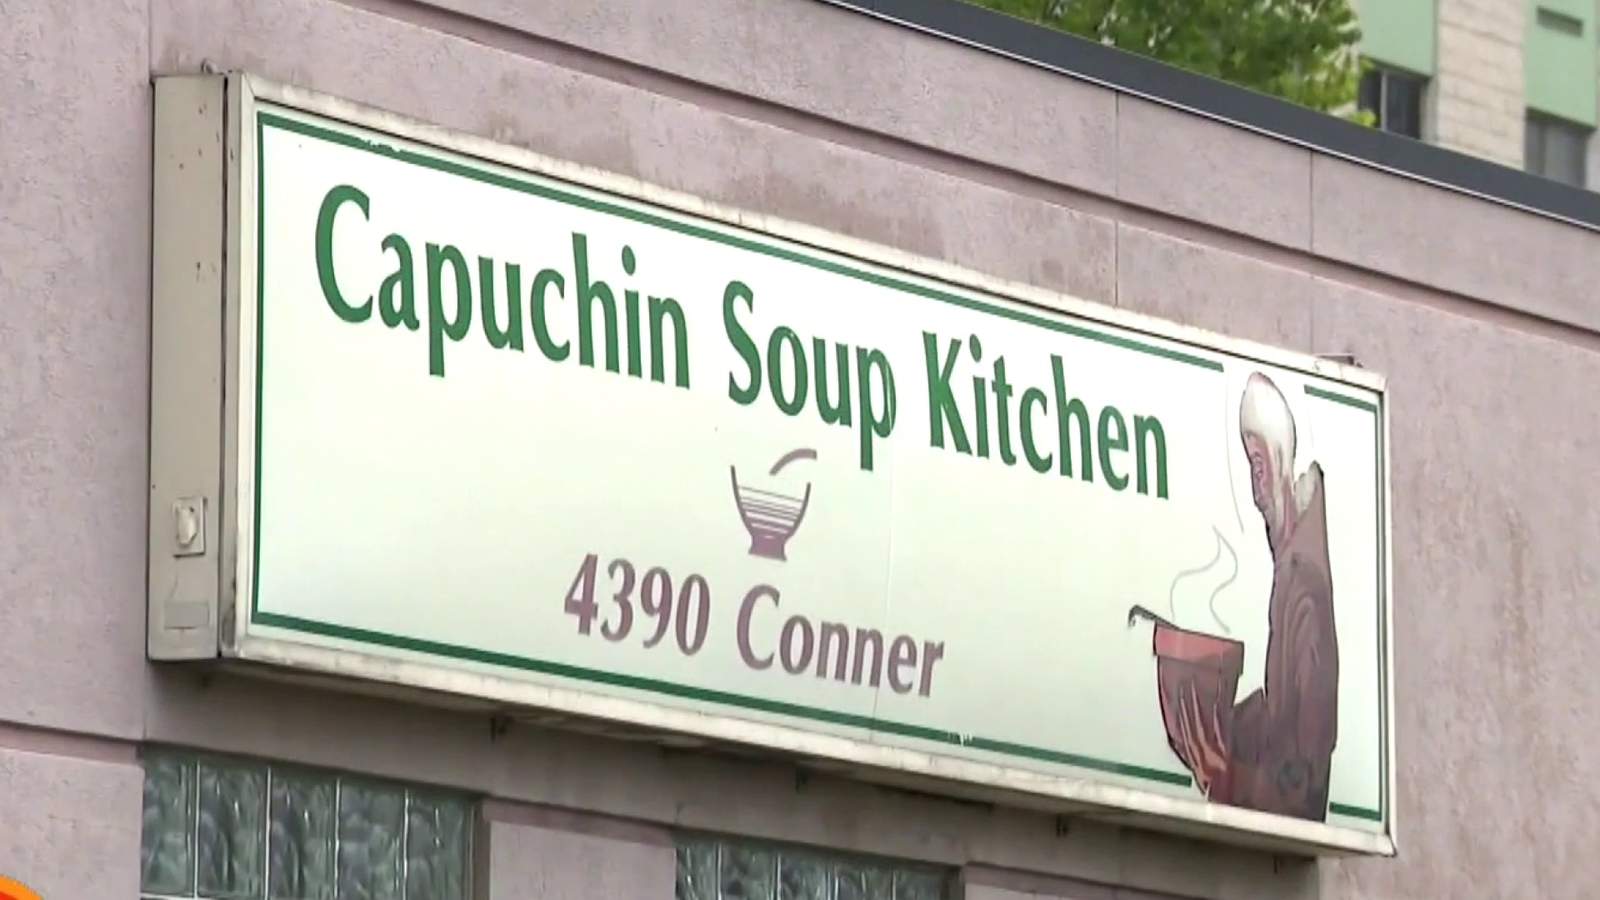 How the Capuchin Soup Kitchen is rising up to help others during the pandemic